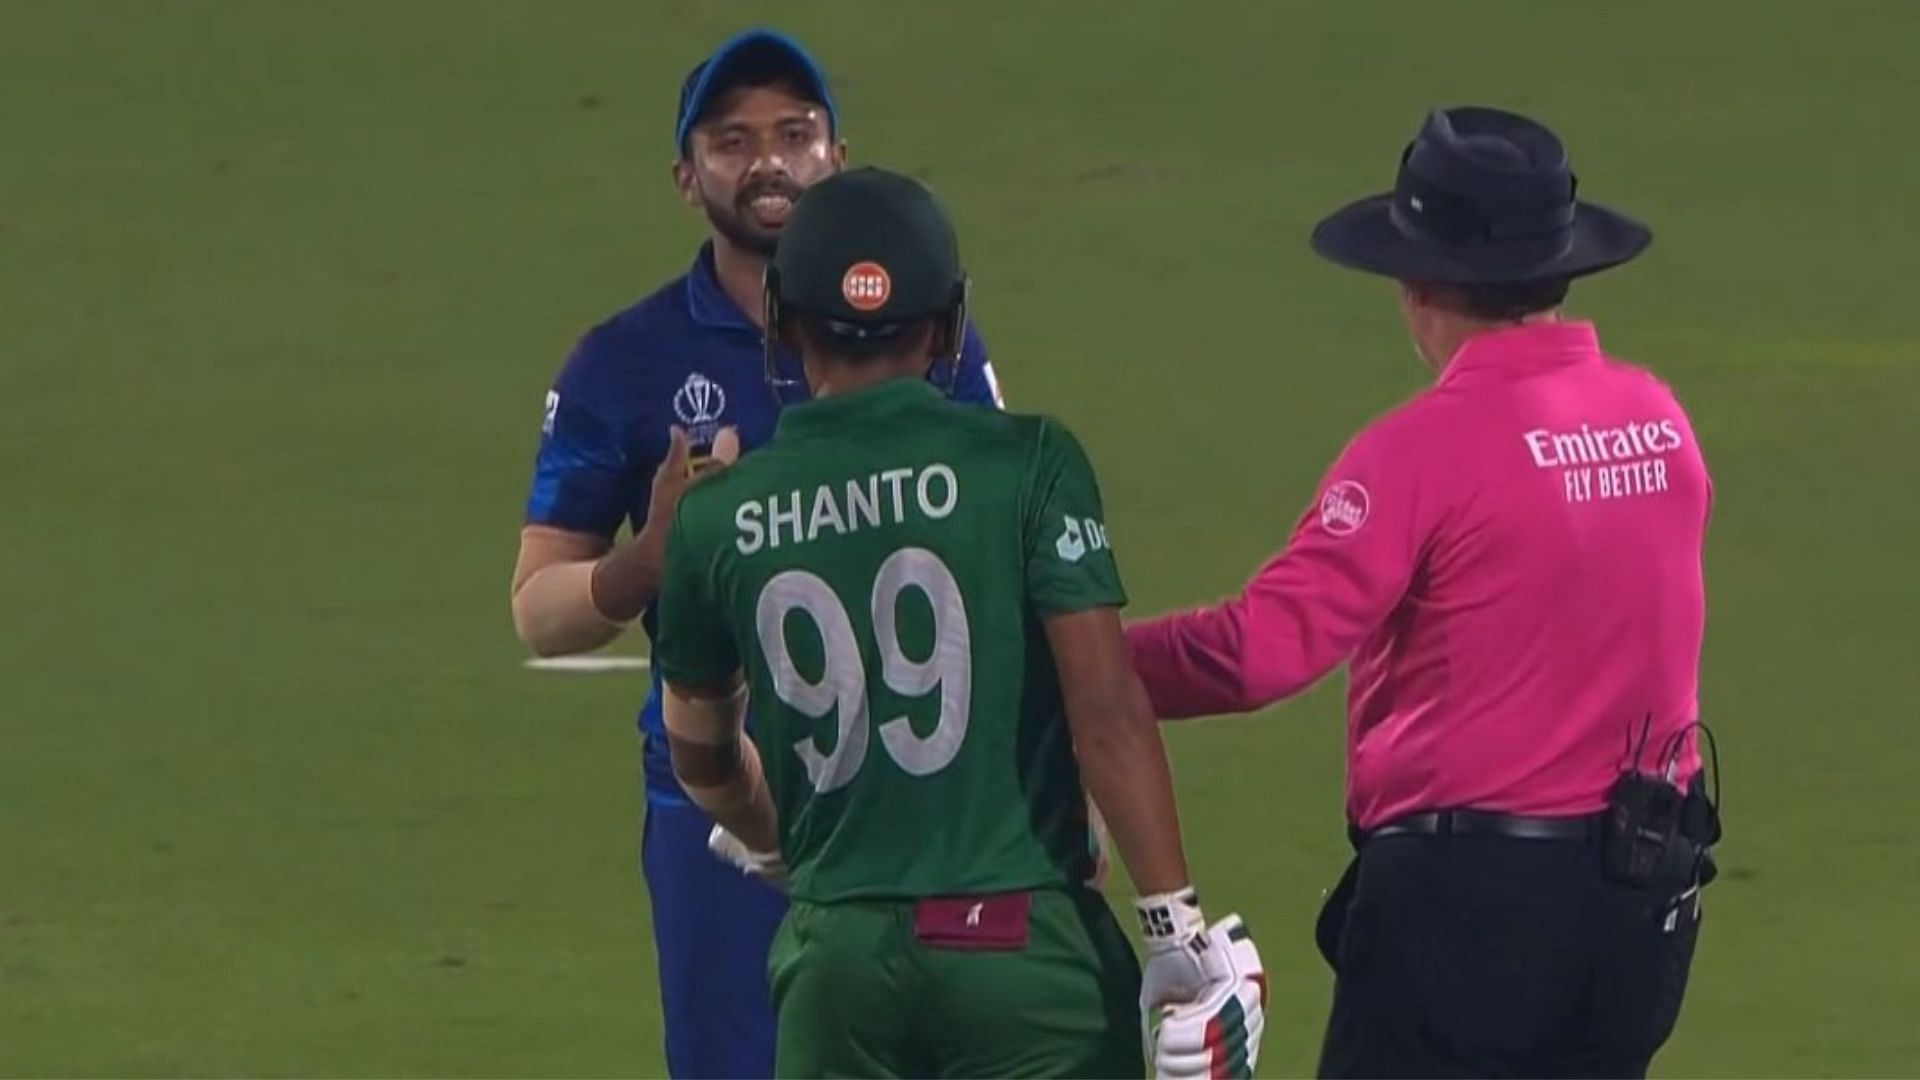 The umpire had to intervene to stop the two players from fighting further (P.C.:ICC)